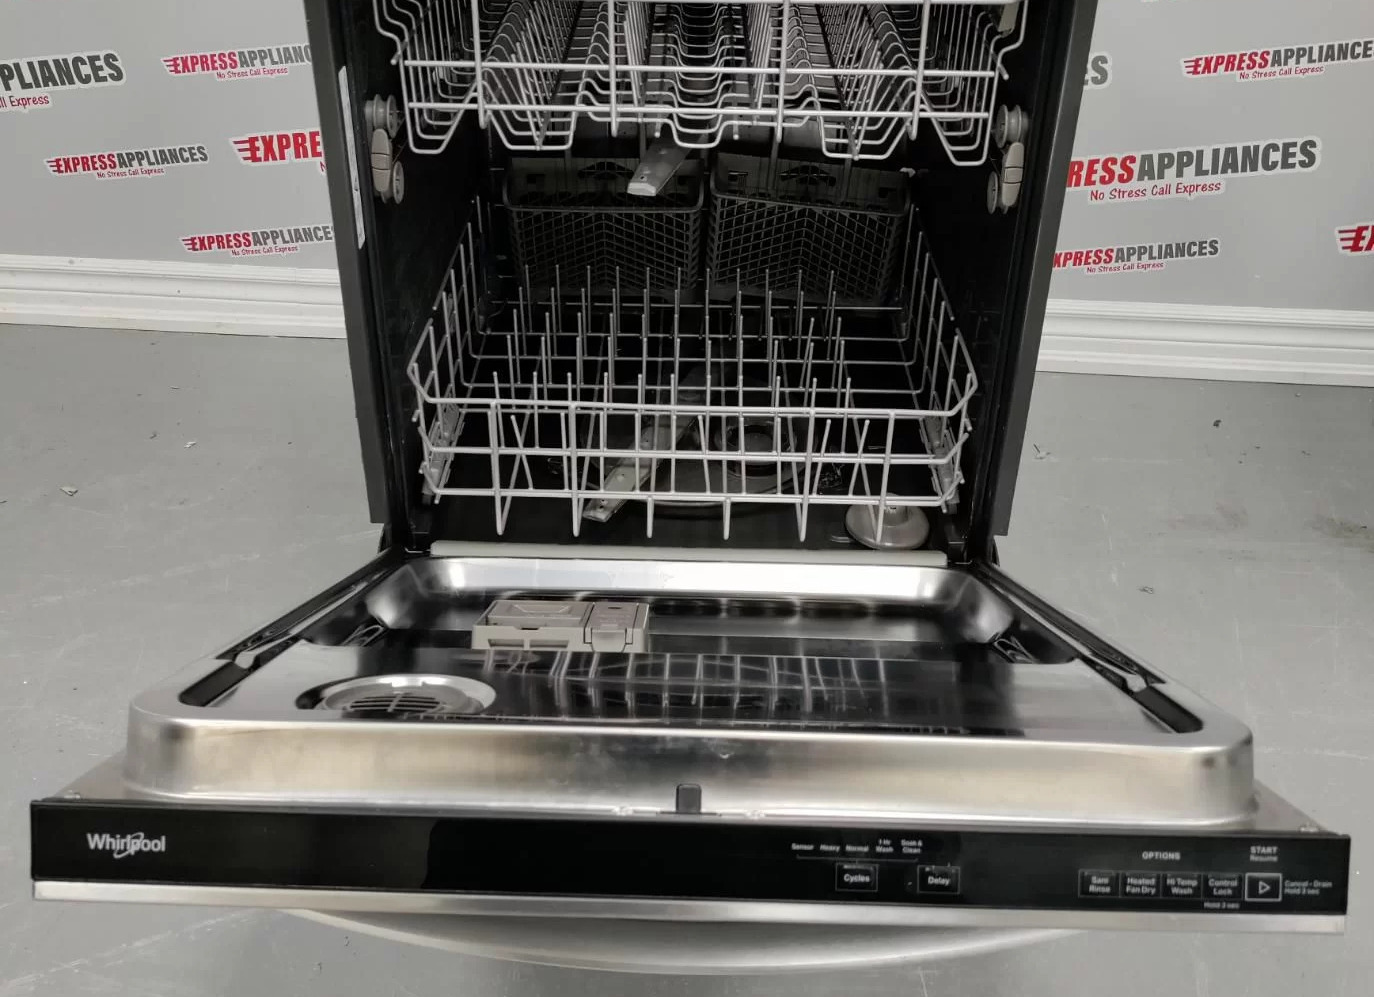 How To Fix The Error Code 45202 For Whirlpool Dishwasher